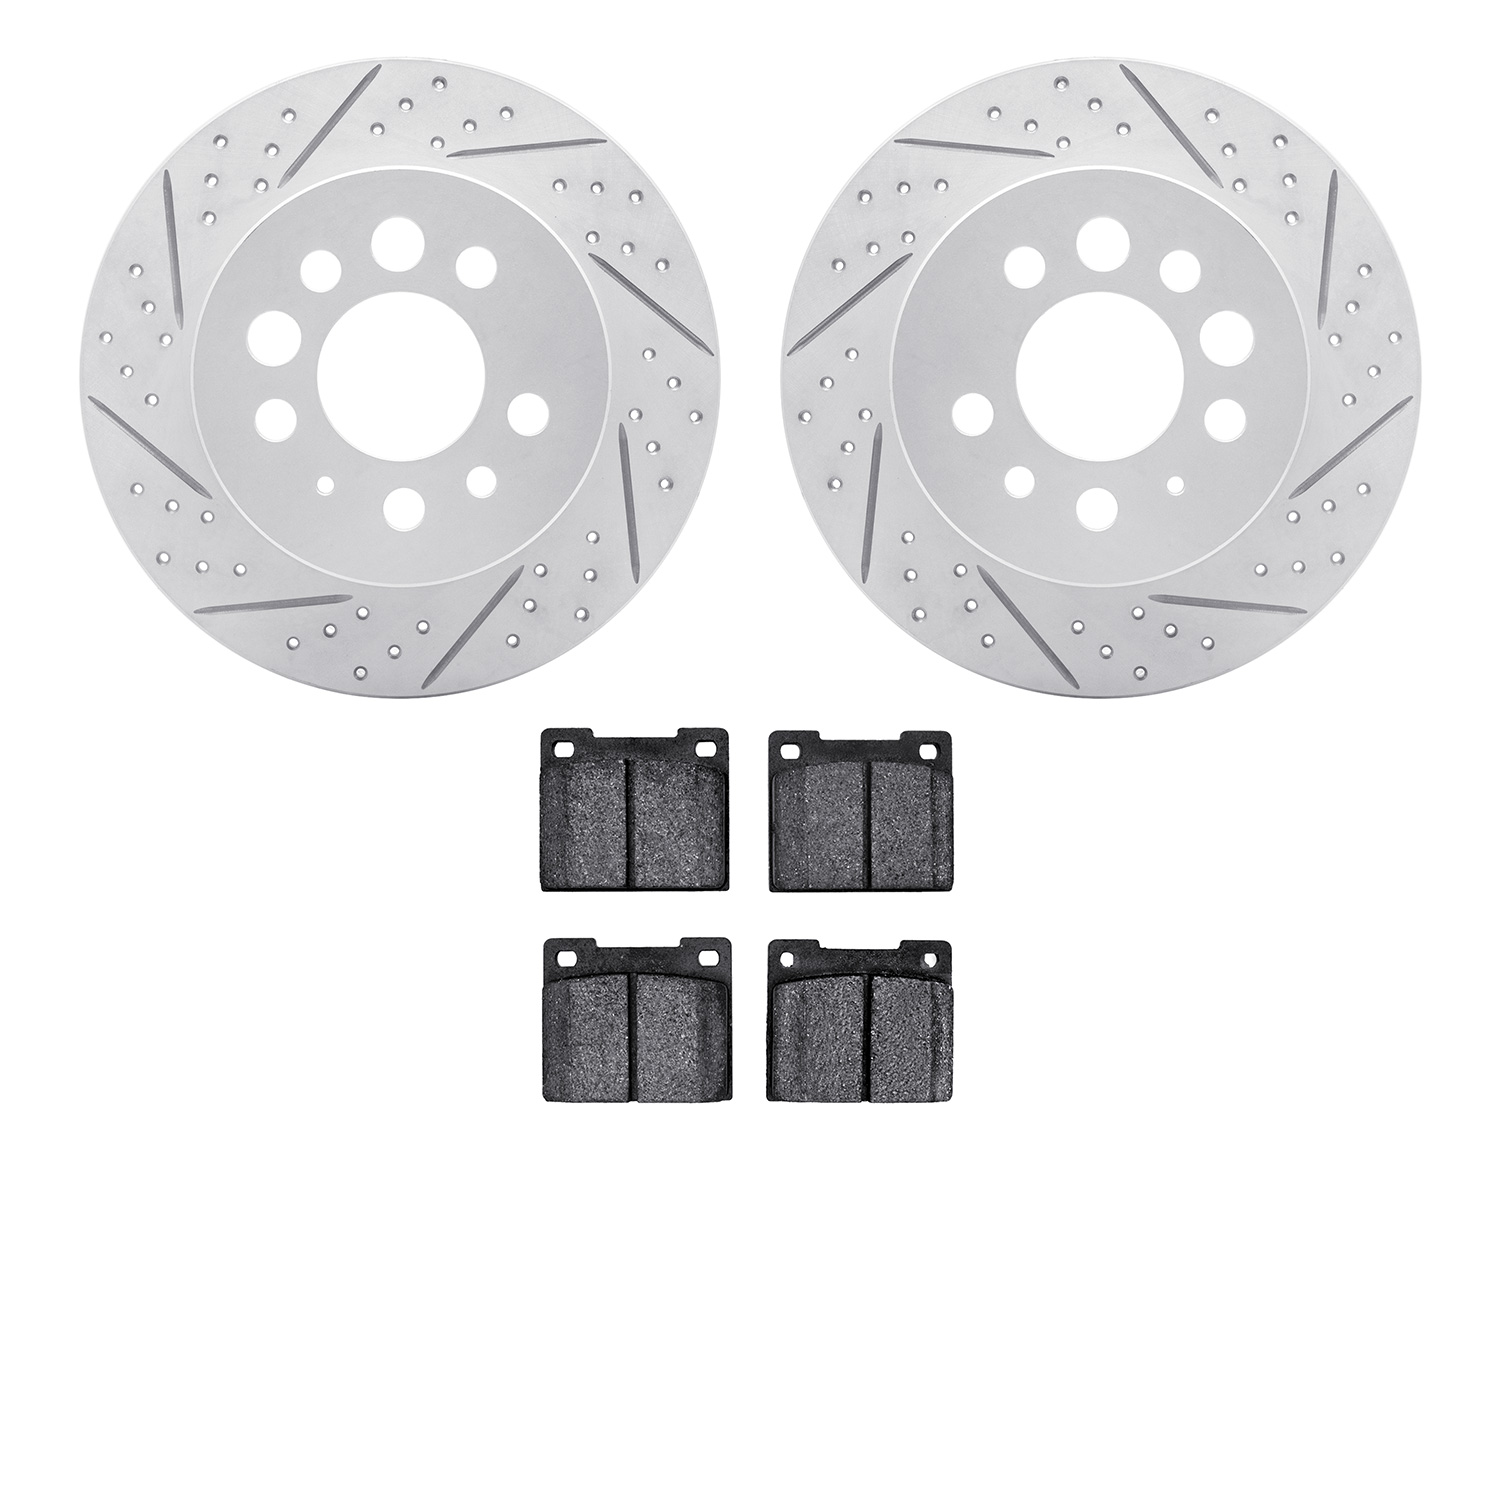 2502-27002 Geoperformance Drilled/Slotted Rotors w/5000 Advanced Brake Pads Kit, 1975-1987 Volvo, Position: Rear